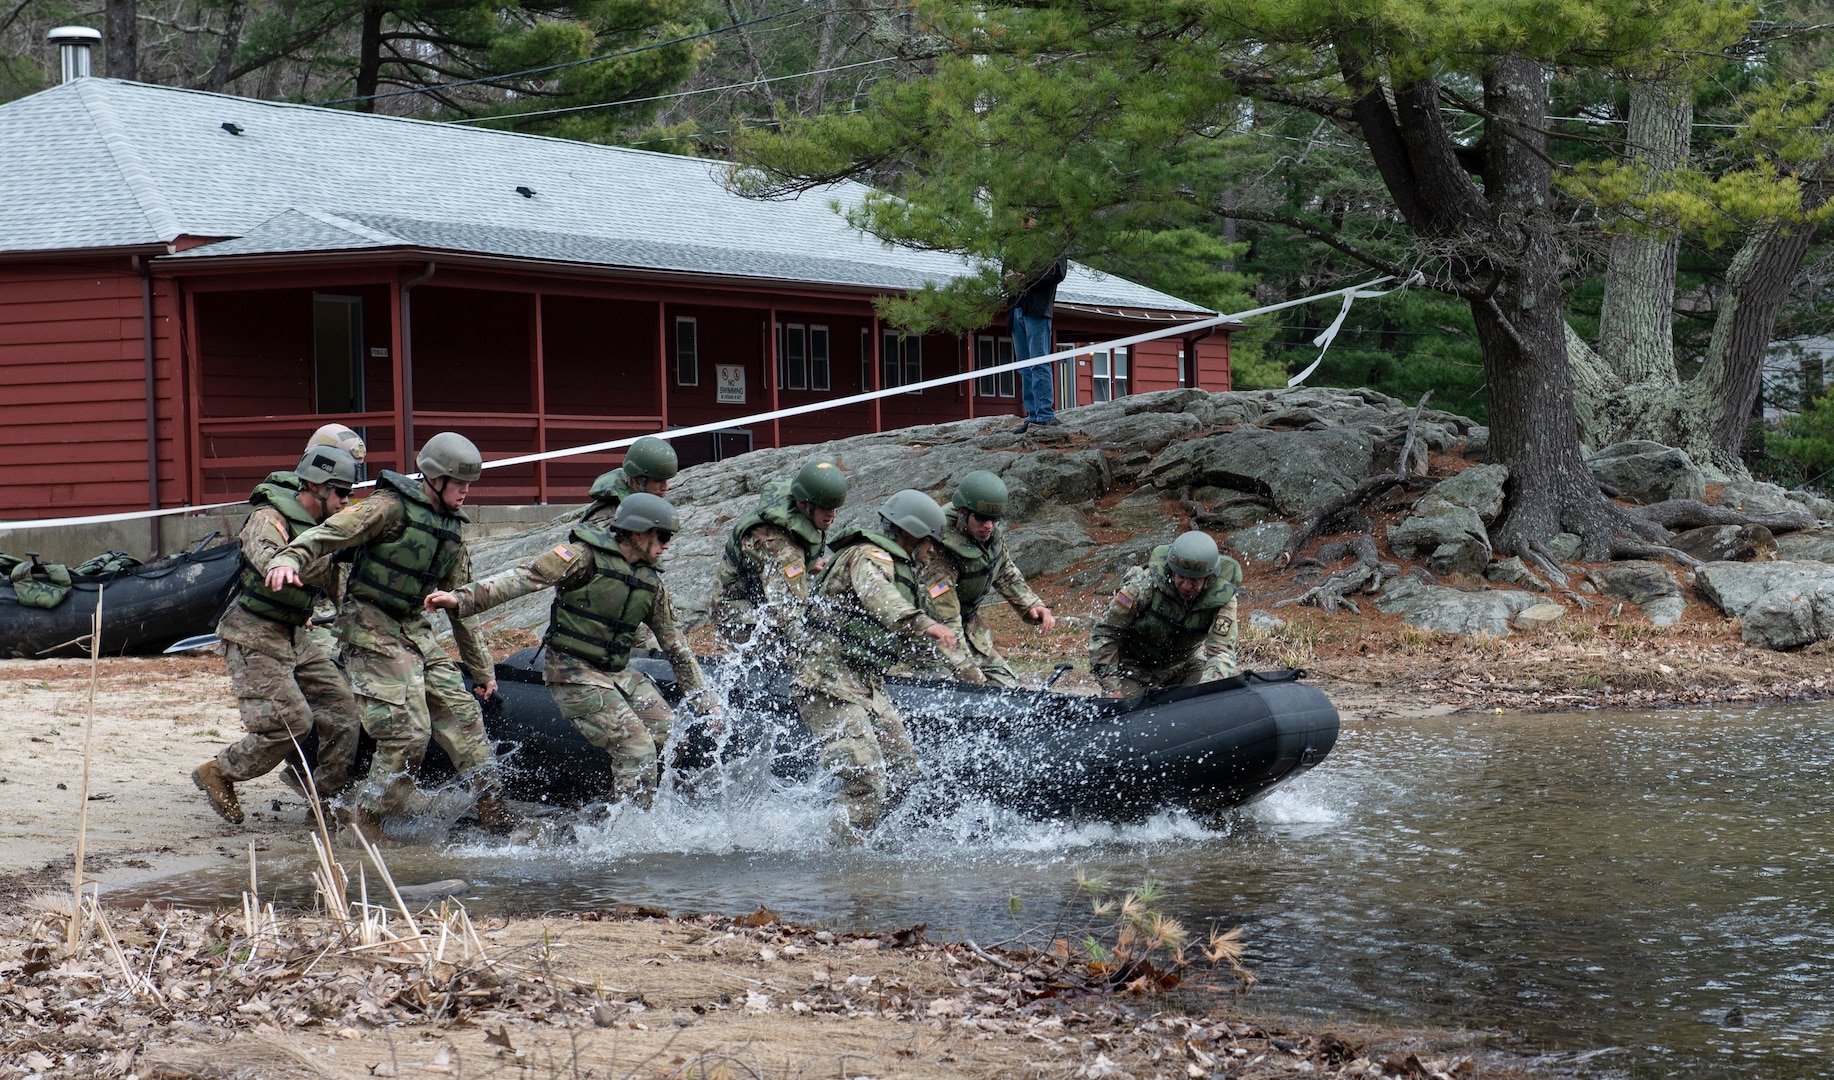 Tarleton State Army ROTC cadets rush to carry their zodiac boat into the water in the timed Zodiac Challenge event during the 51st annual Sandhurst Military Skills Competition at the U.S. Military Academy at West Point, New York, April 12-13. The team was one of two representing 5th Brigade Army ROTC, headquartered at Joint Base San Antonio-Fort Sam Houston.